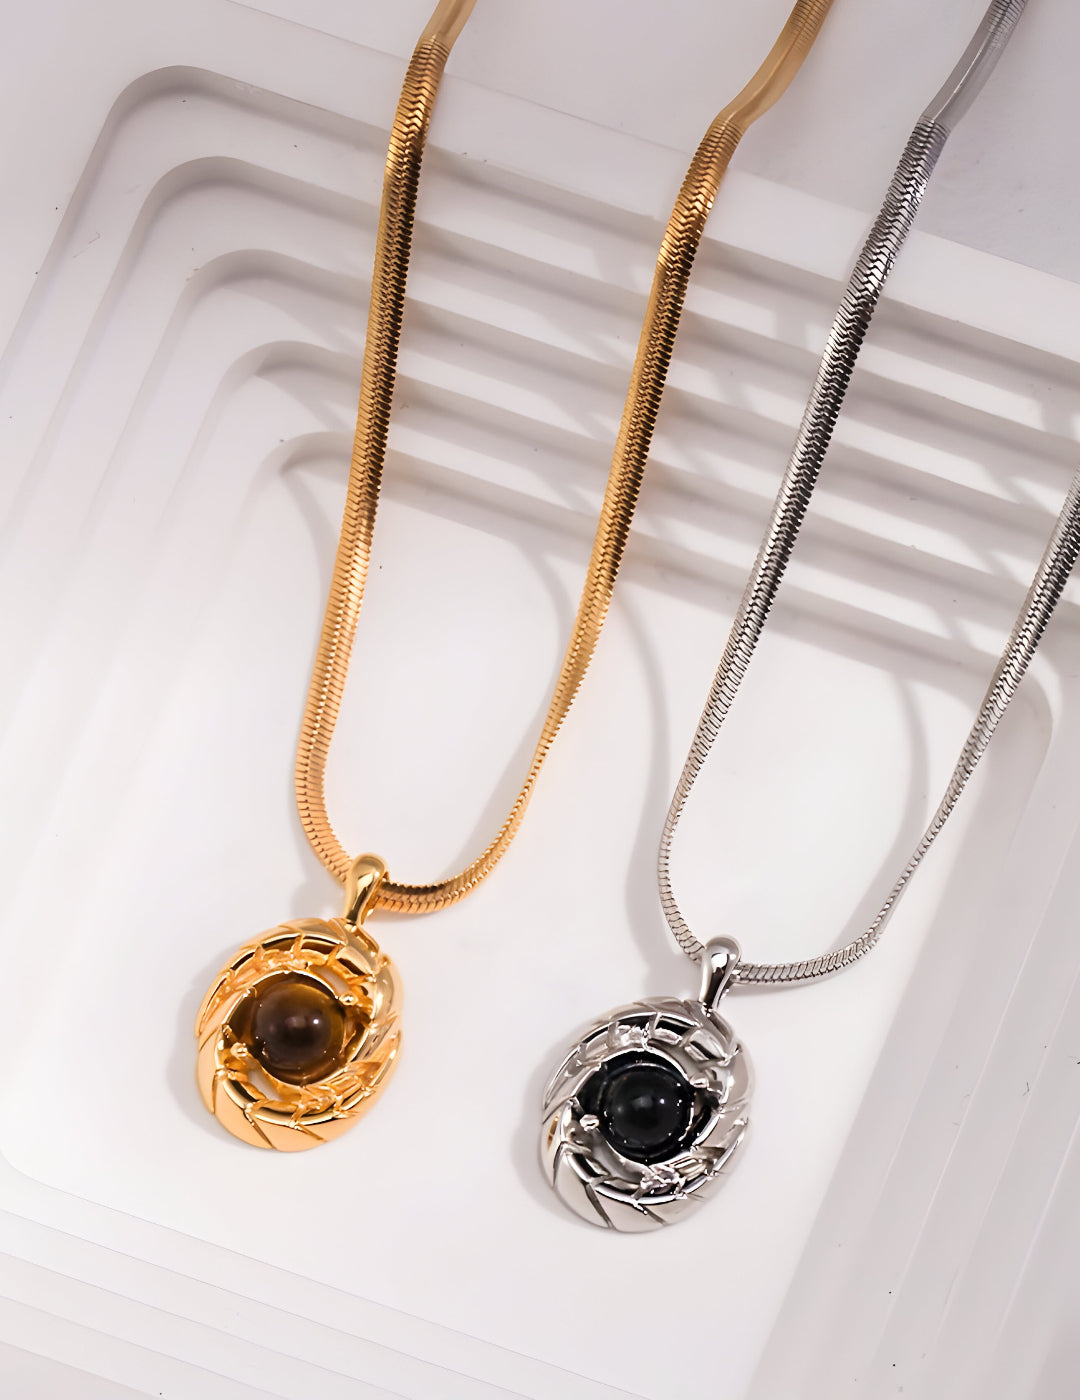 Vintage Gold Necklace with Black Agate Gemstone and Tiger’s Eye Stone - S925 Sterling Silver with 18K Gold Vermeil - Delicate Charisma